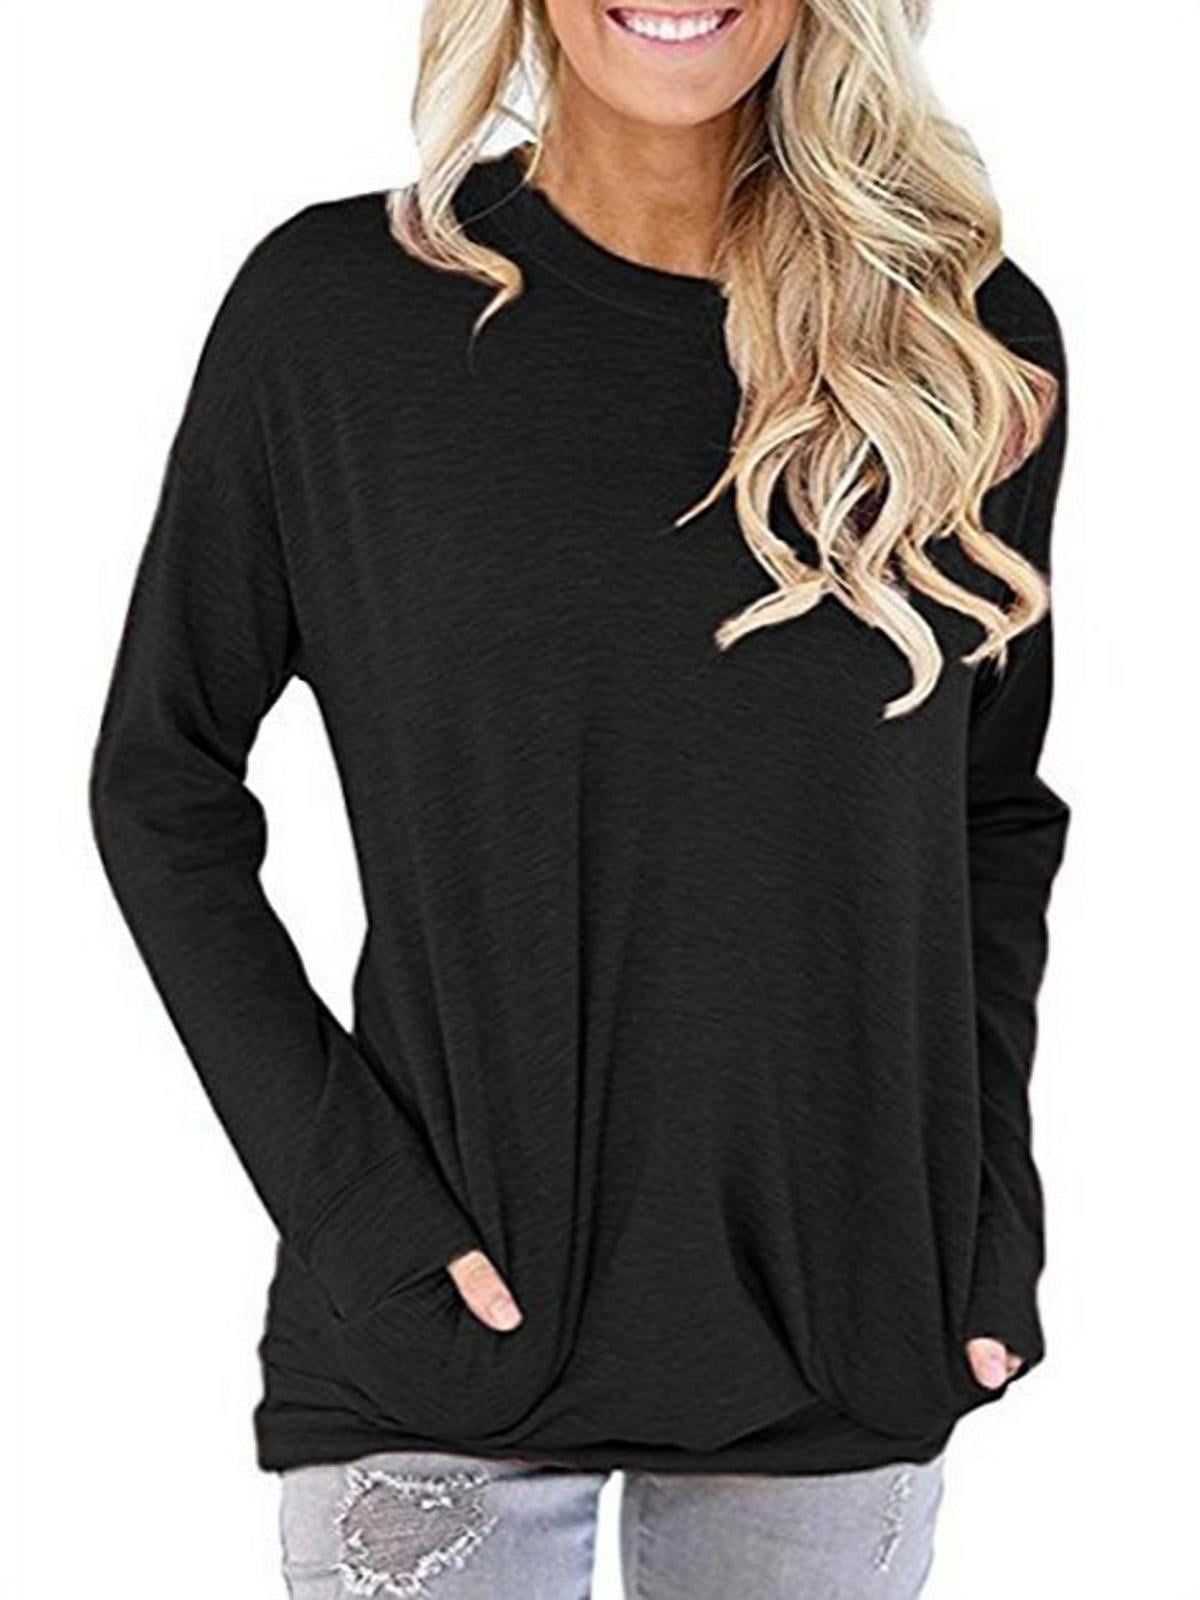 Portazai Pullover Sweatshirt for Women Long Sleeve Horse Graphic Sweatshirts Tops Casual Loose Blouse Shirts Sweaters 